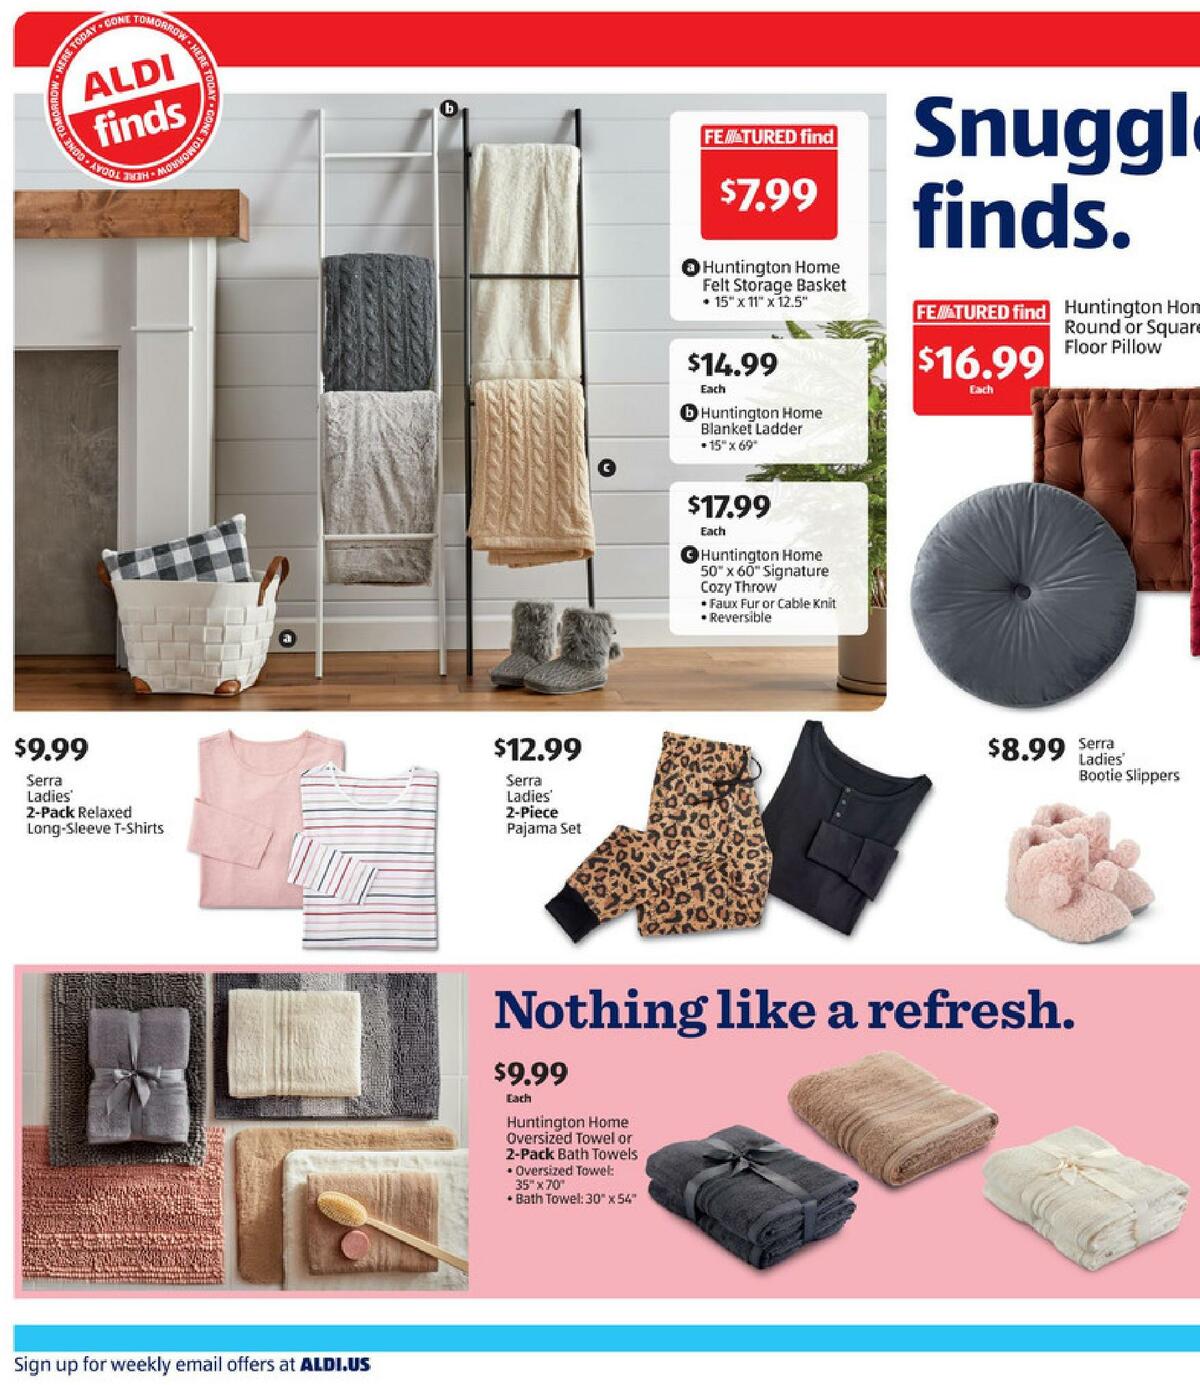 ALDI In Store Ad Weekly Ad from October 18